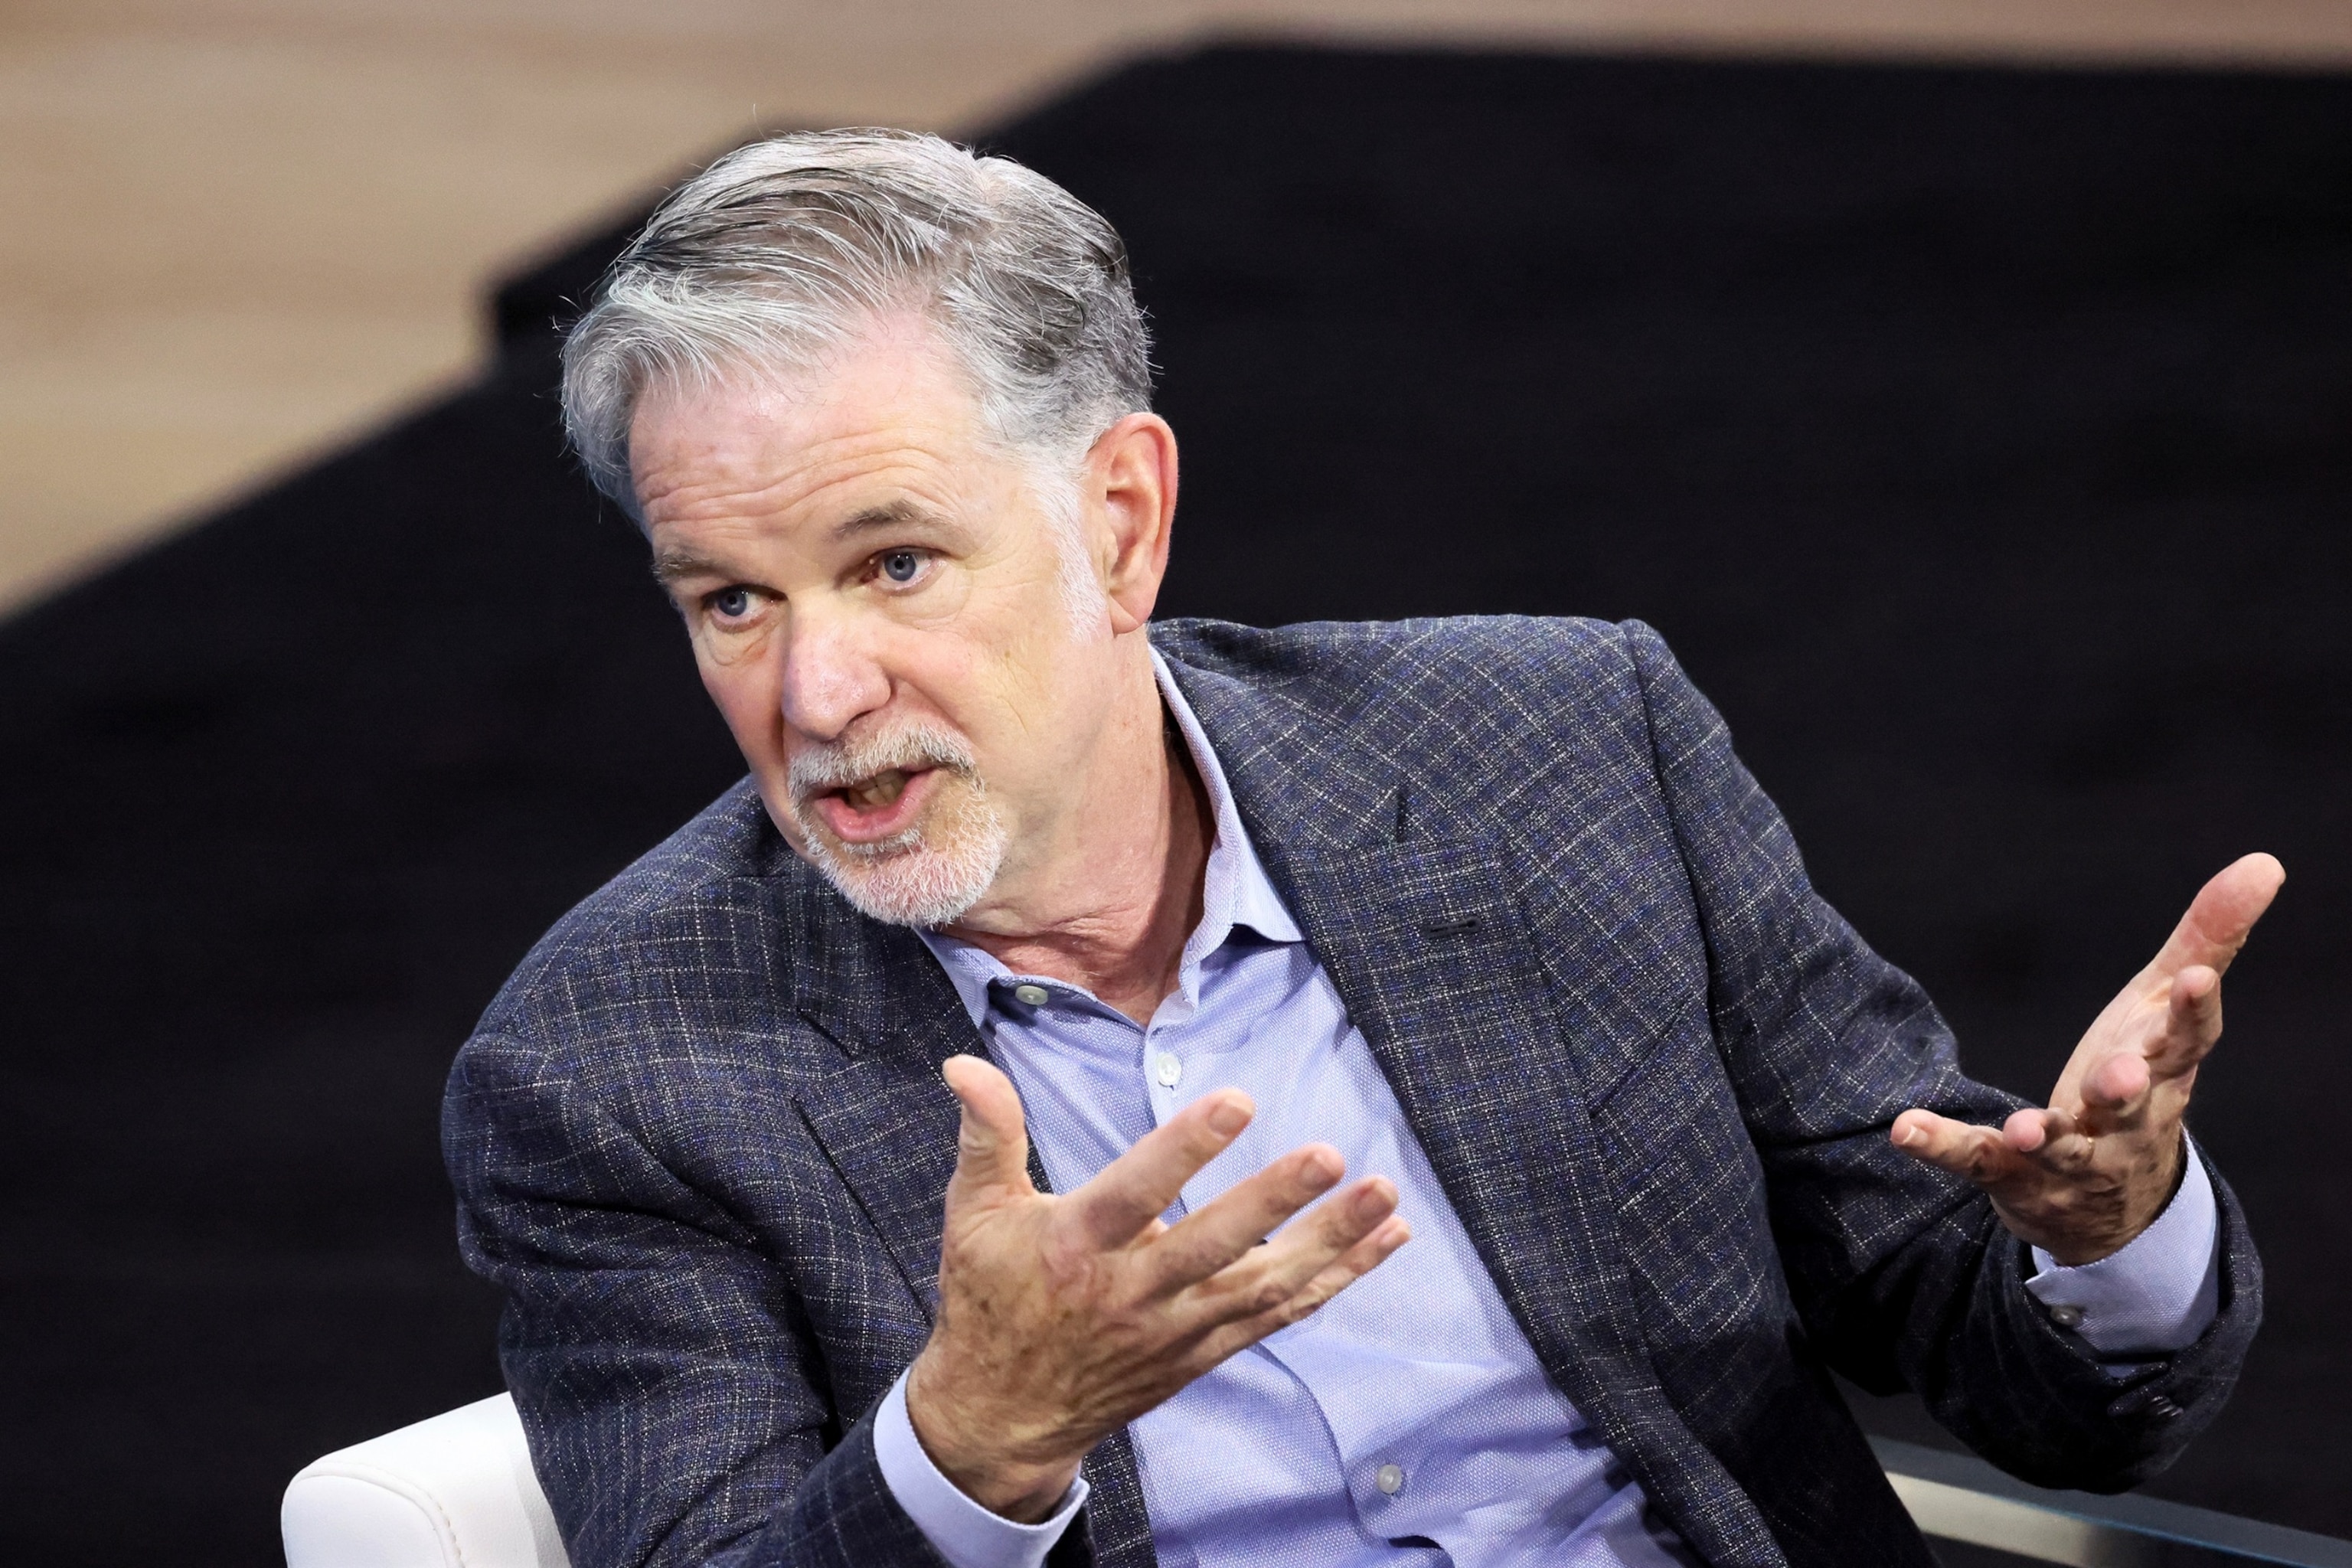 PHOTO: In this Nov. 30, 2022, file photo, Netflix founder and Co-CEO Reed Hastings speaks at an event in New York.